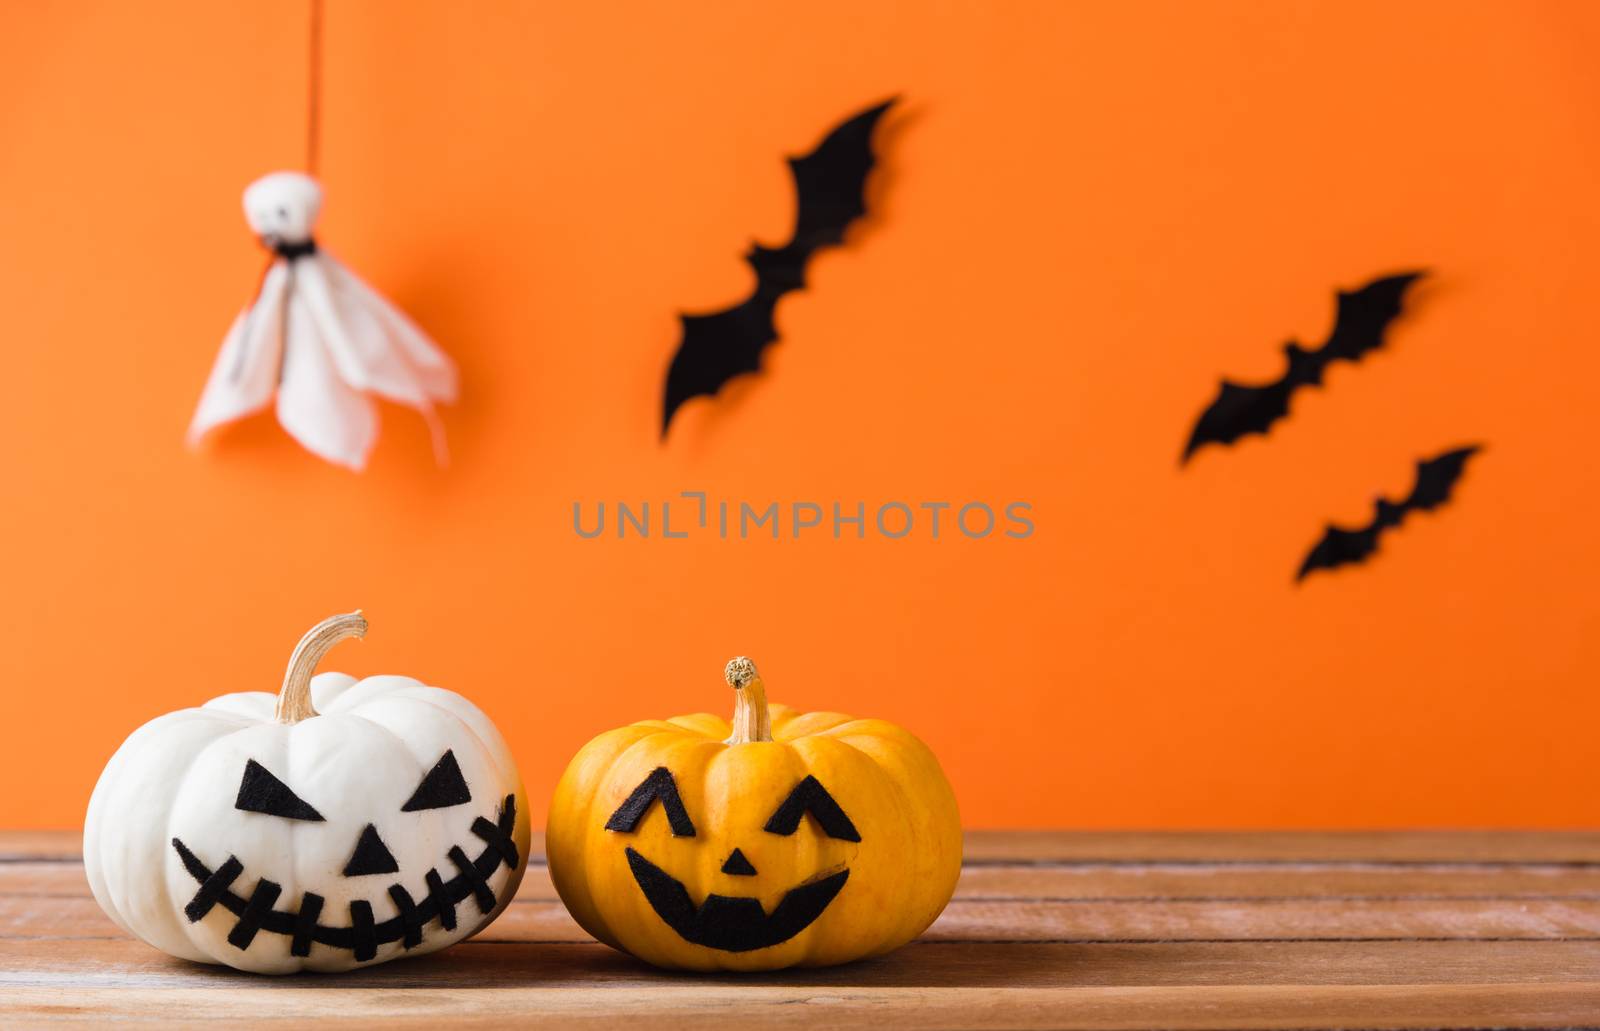 Funny Halloween day decoration party, Cute pumpkin ghost spooky jack o lantern face, black spider and bats on wooden table, studio shot isolated on an orange background, Happy holiday concept